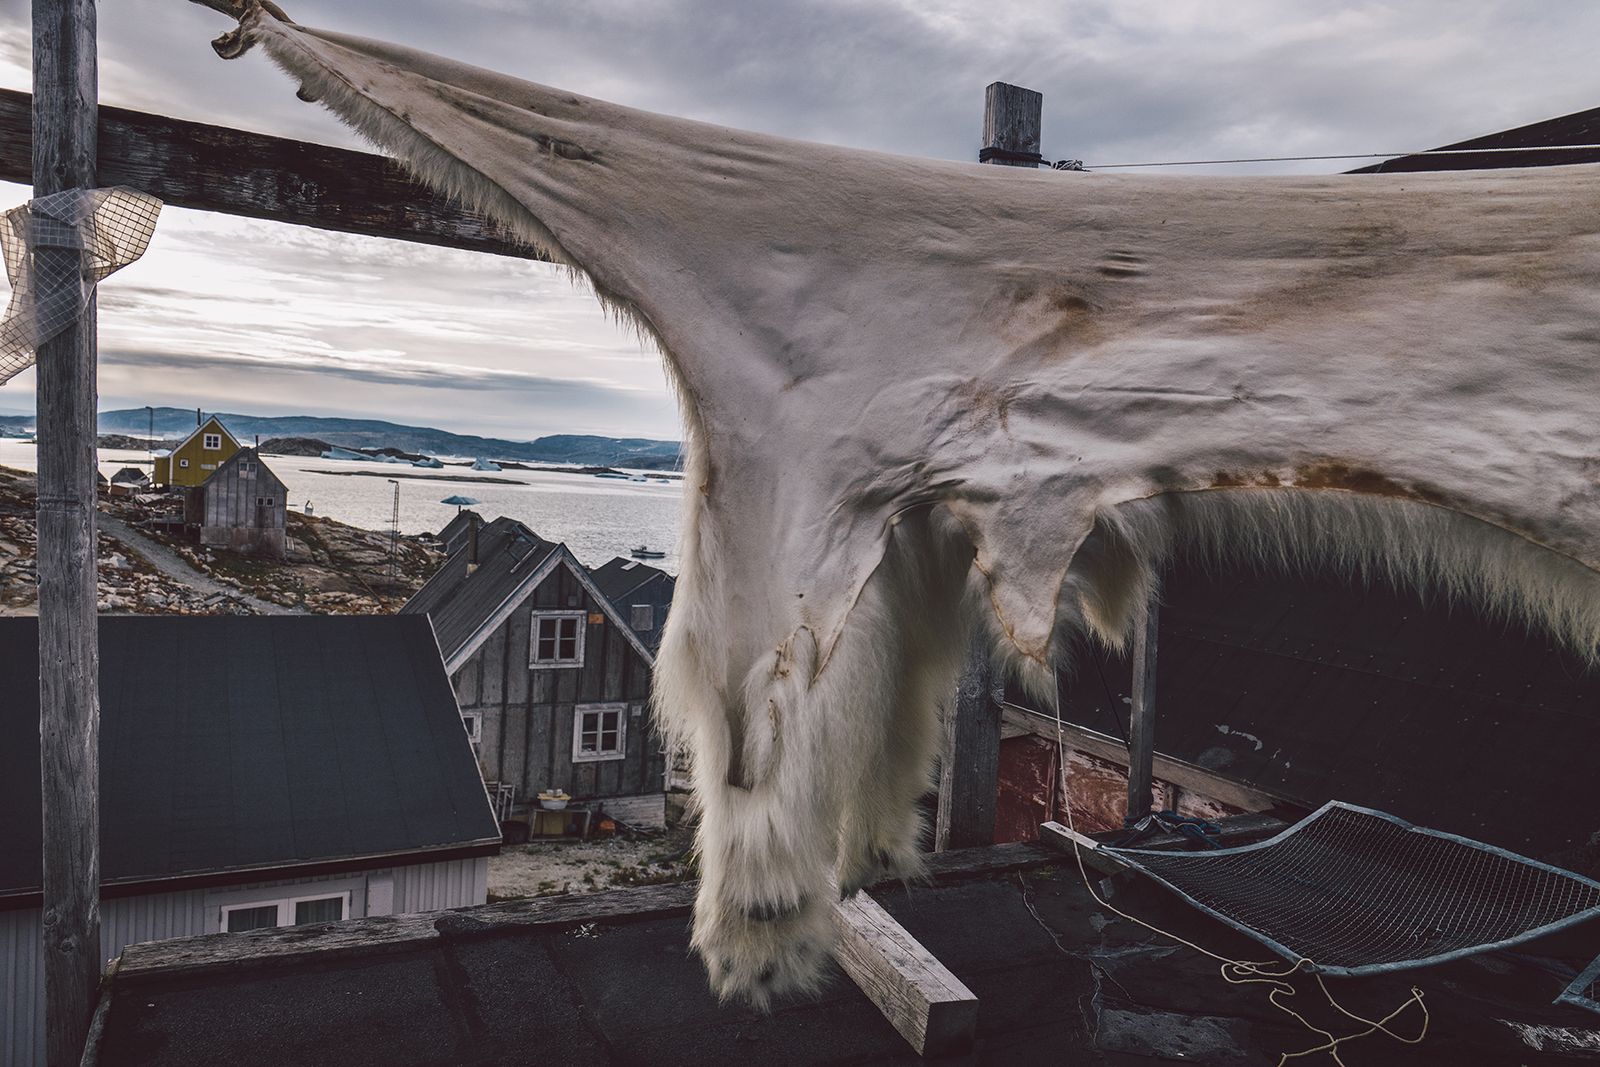 © Jolie Luo - Image from the Greenland Lost Dreams photography project